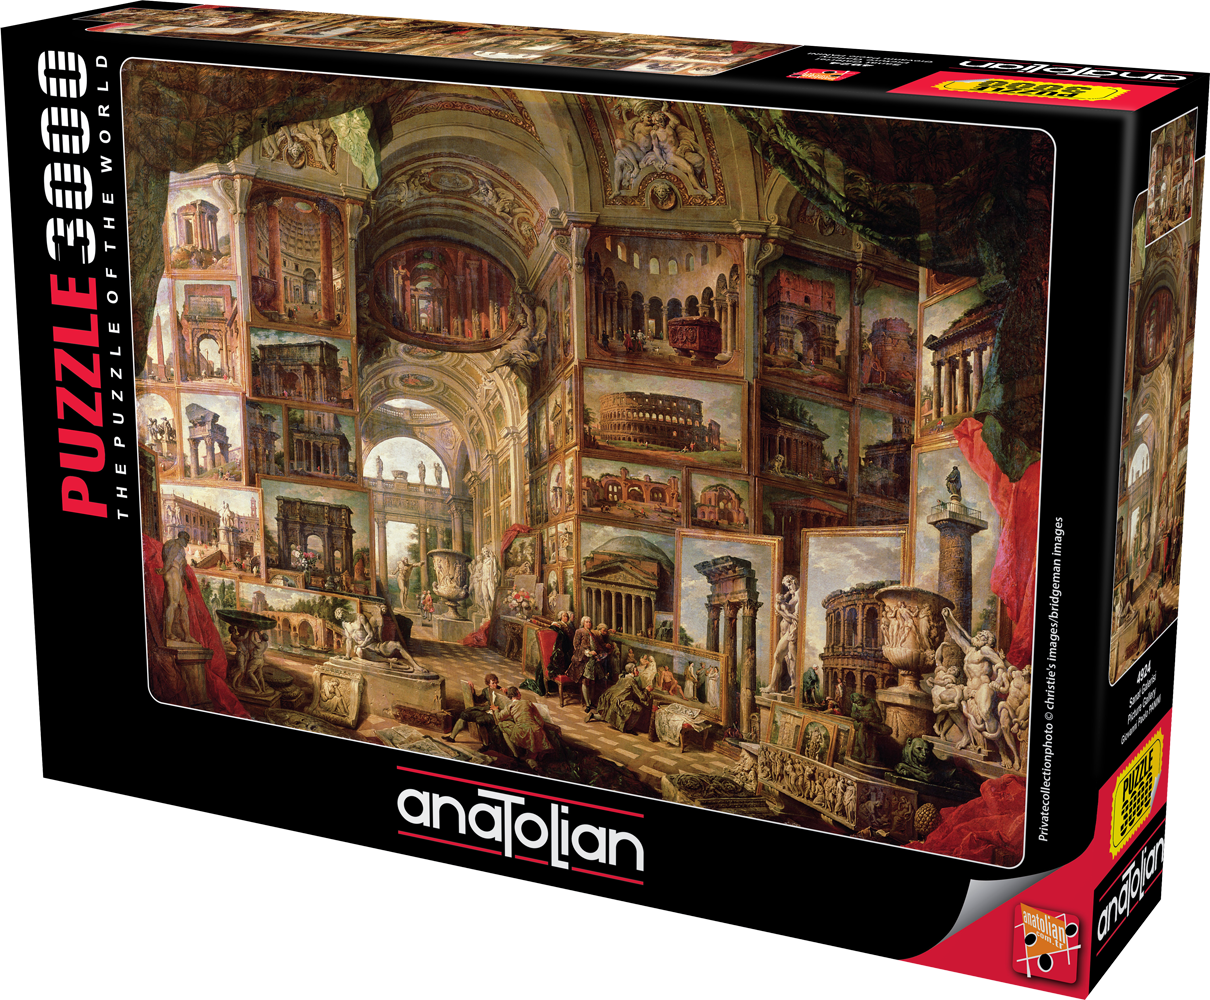 Anatolian Puzzle - Picture Gallery, 3000 Piece Puzzle, #4924